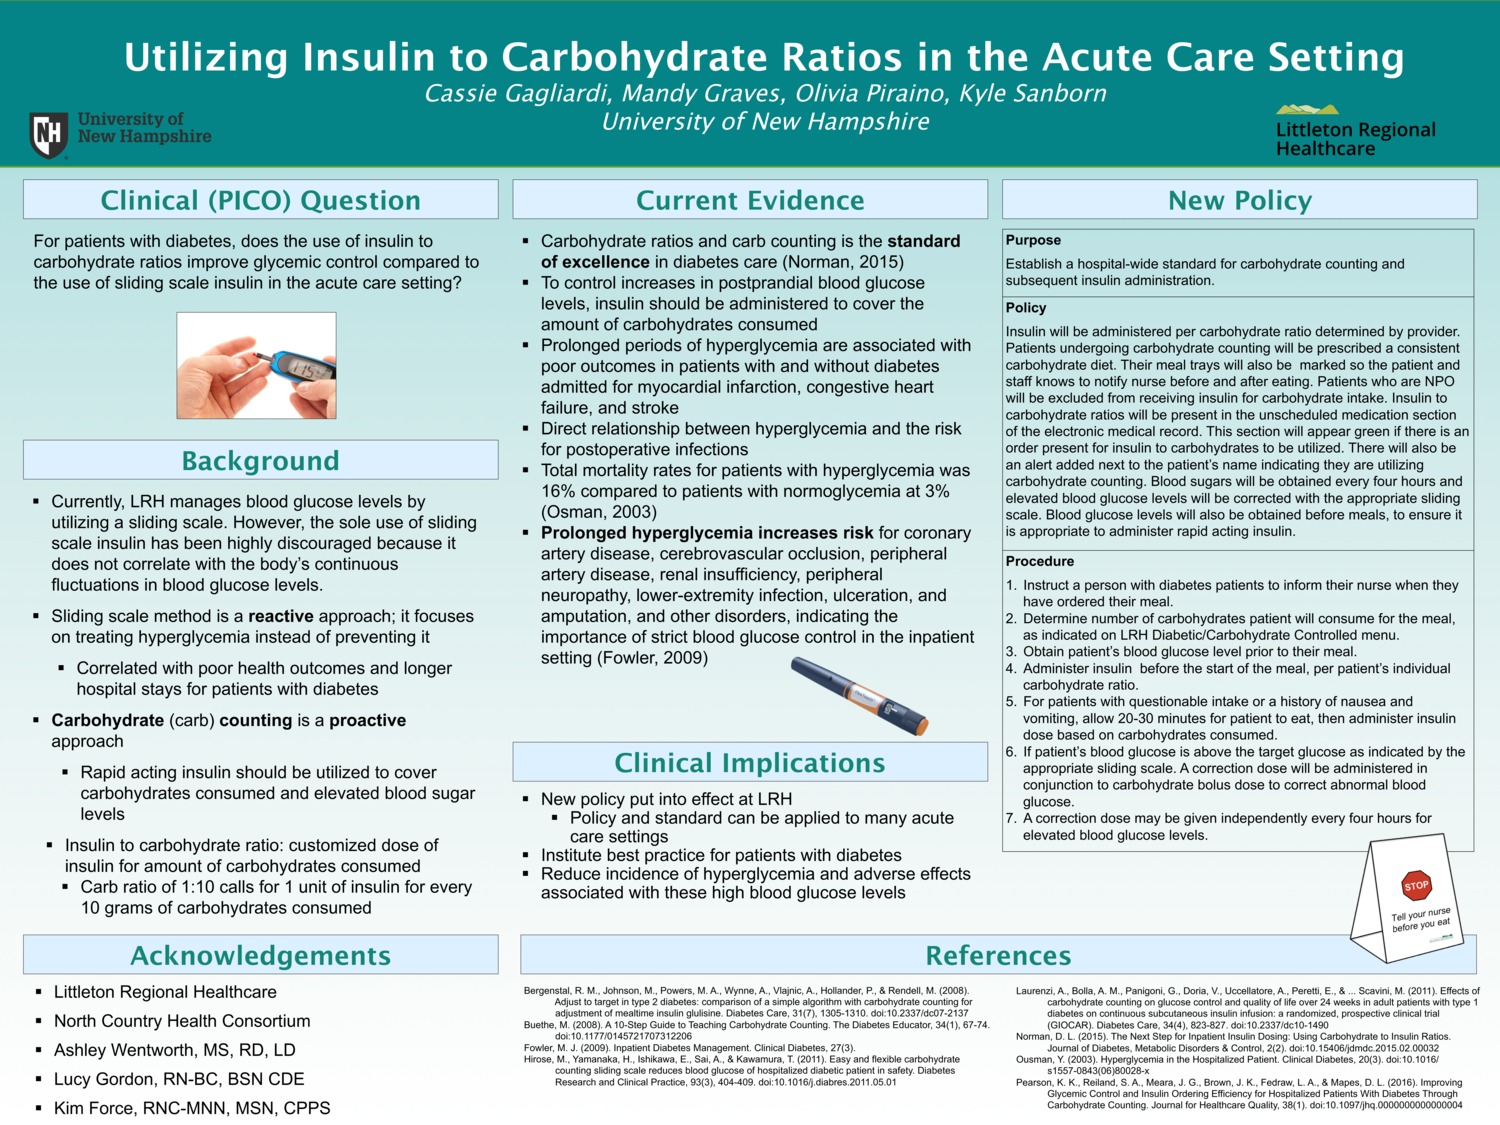 Utilizing Insulin To Carbohydrate Ratios In The Acute Care Setting by acg2001